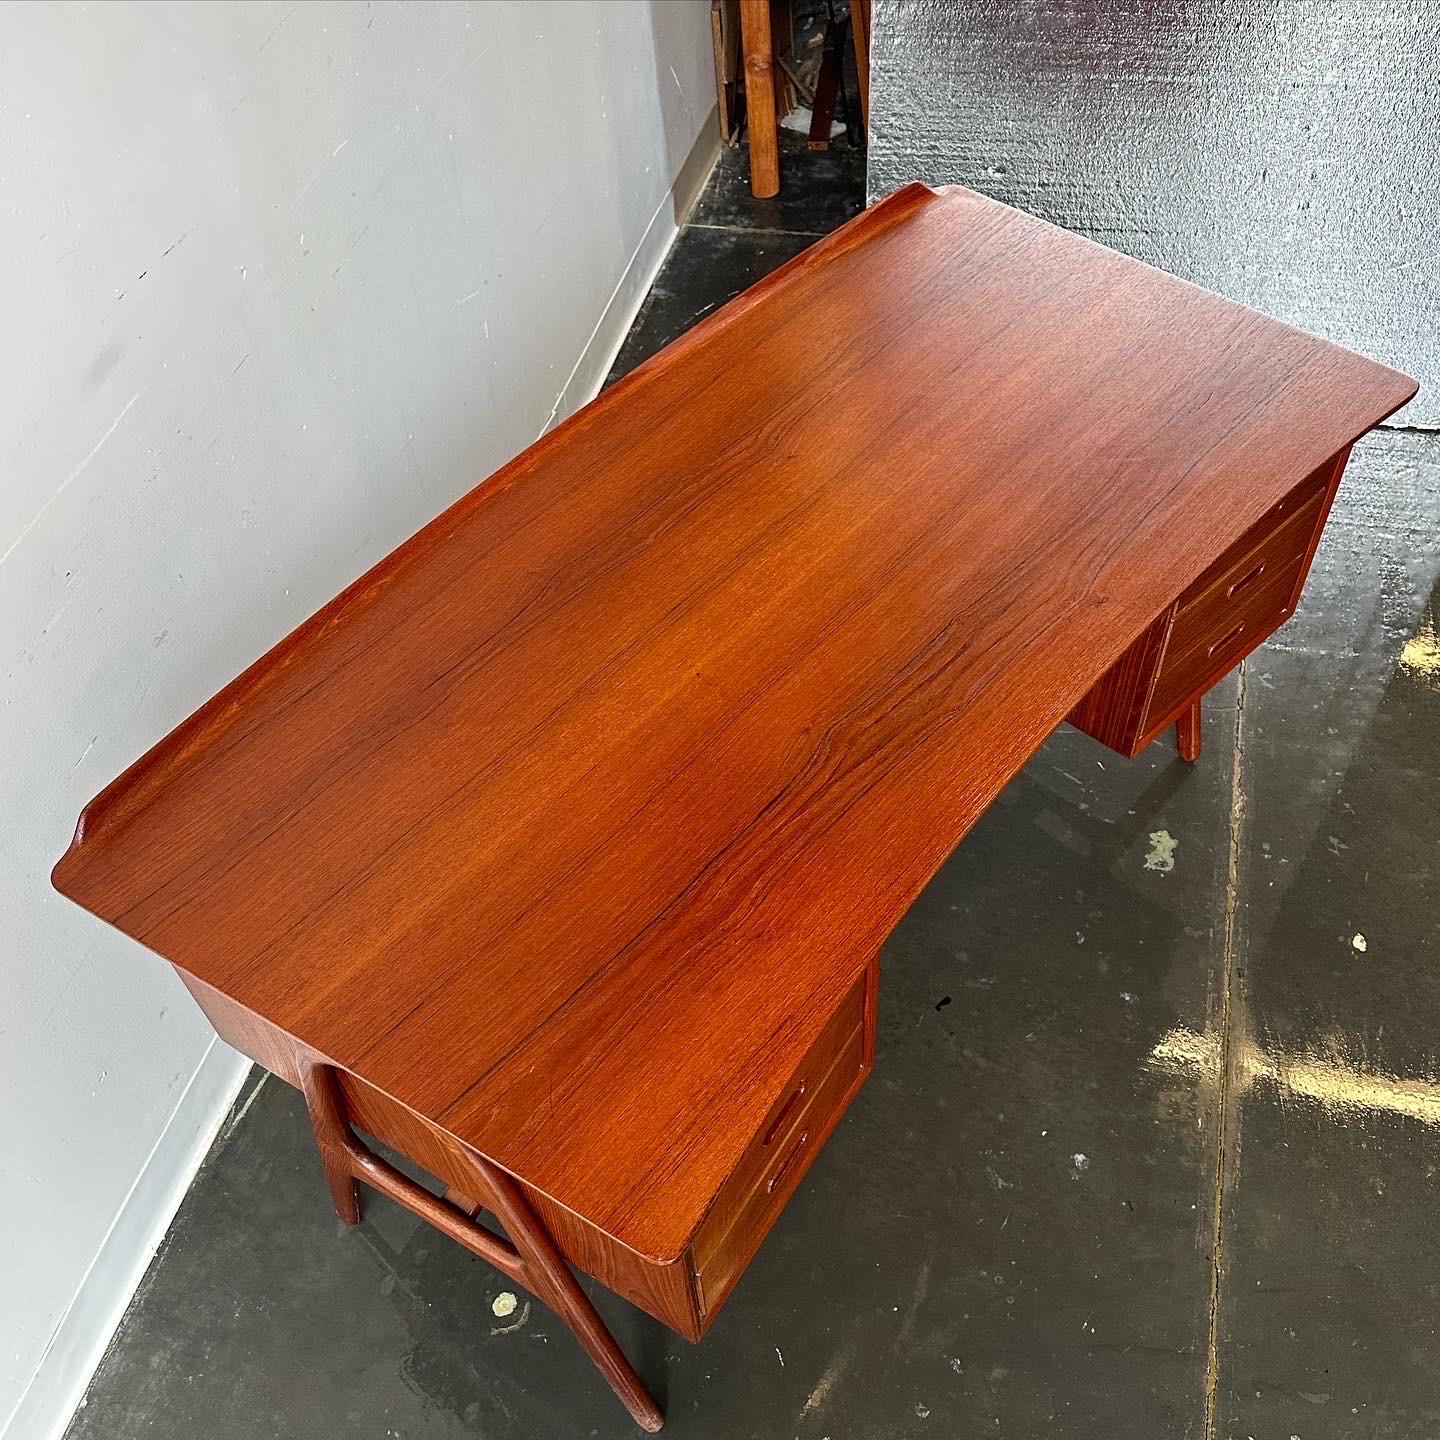 Svend Aage Madsen for Sigurd Hansen Mid Century Curved Front Teak Desk

Phenomenal danish desk designed by architect Svend A Madsen circa 1960.

Desk measures: 58 wide x 28 deep x 29 high, with a chair clearance of 26 inches